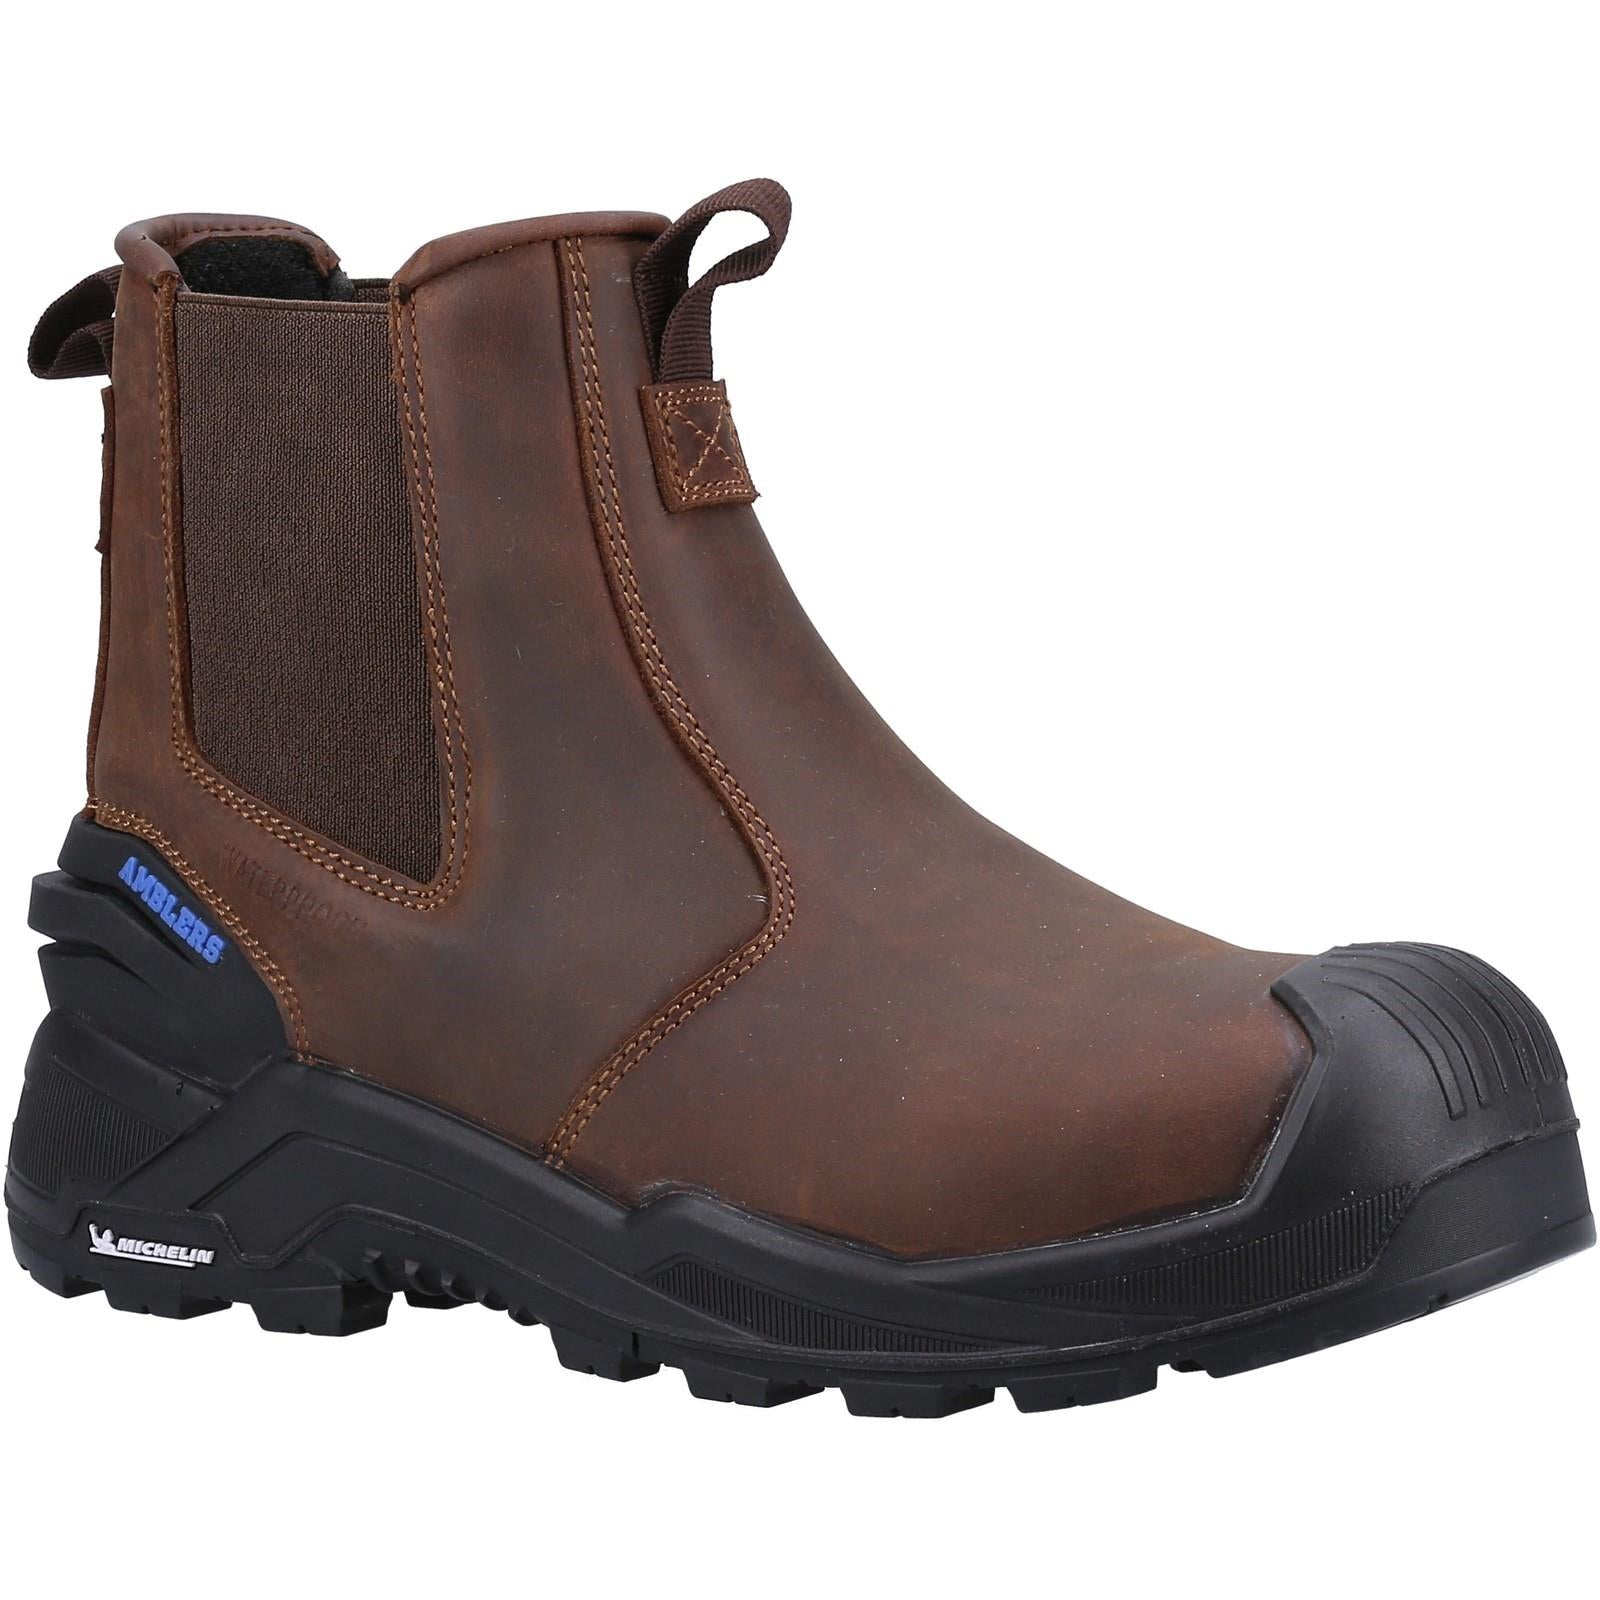 Amblers Conway S3 composite toe waterproof work safety dealer boots #AS982C